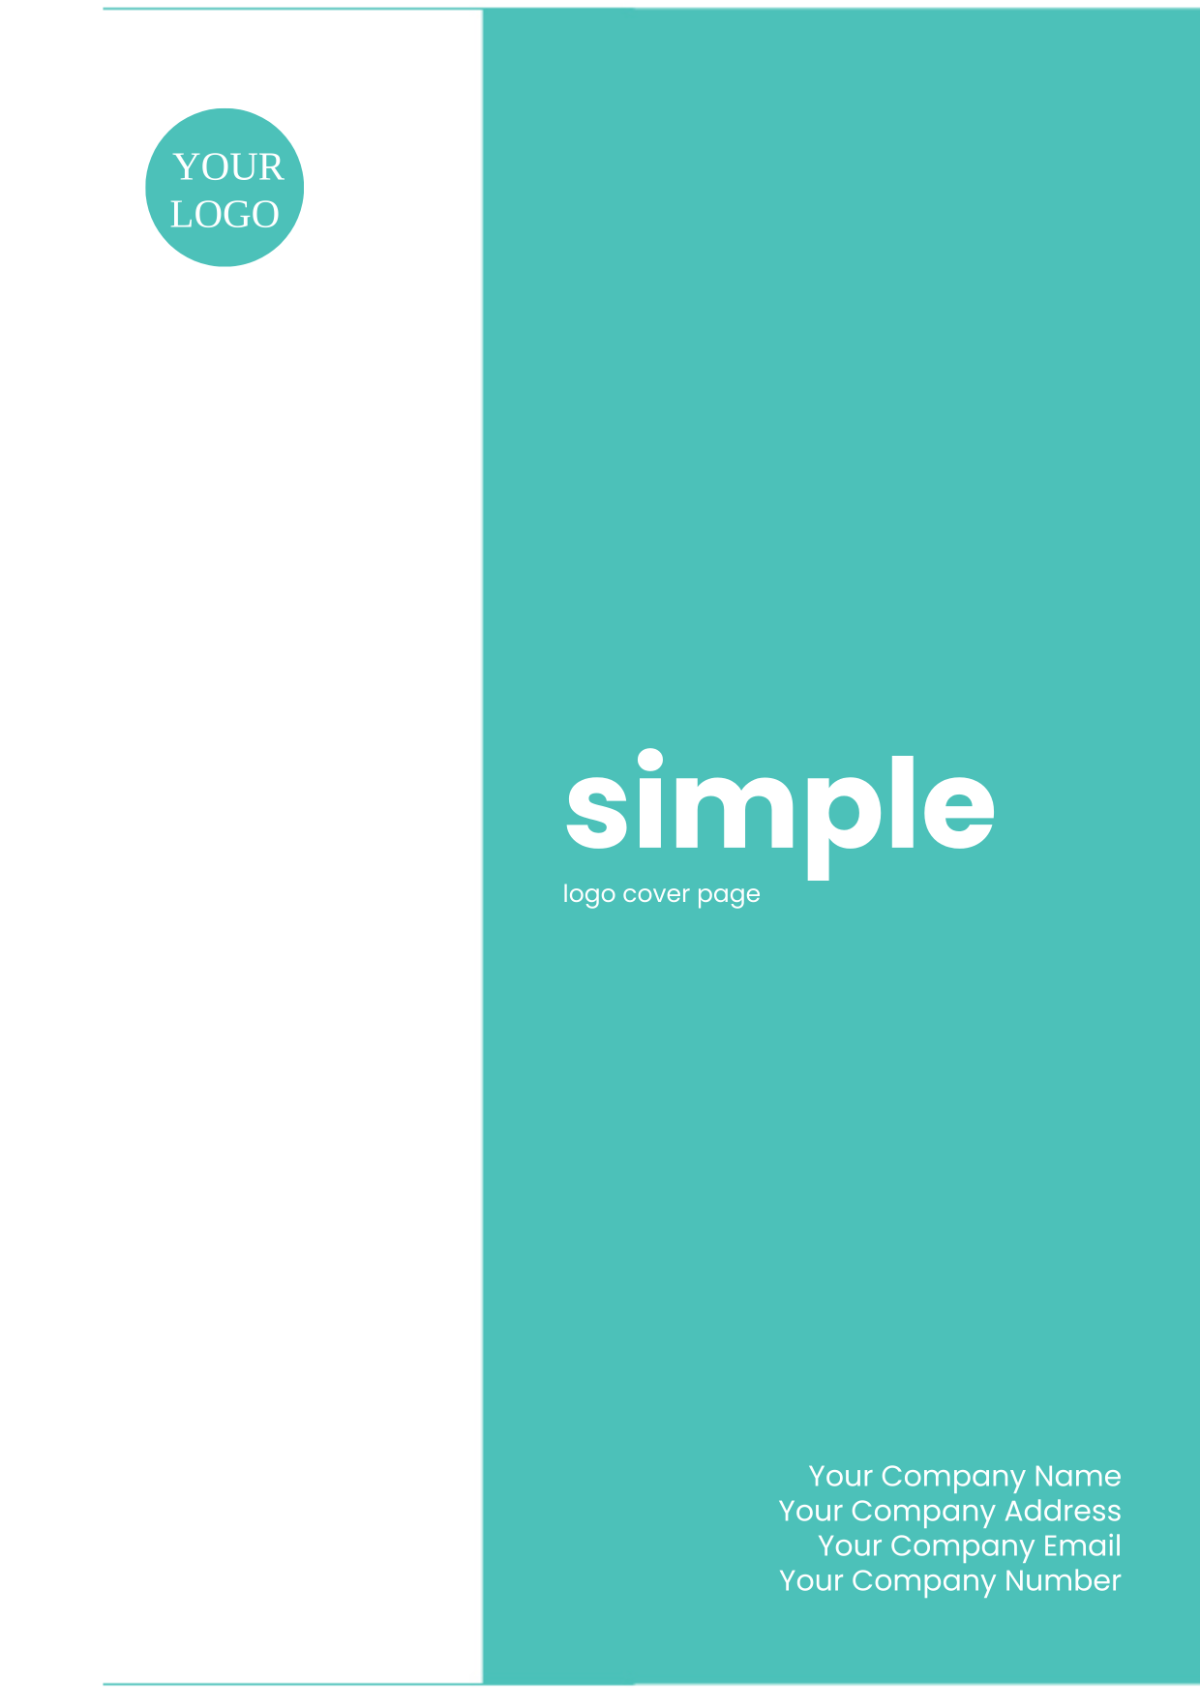 Simple Logo Cover Page